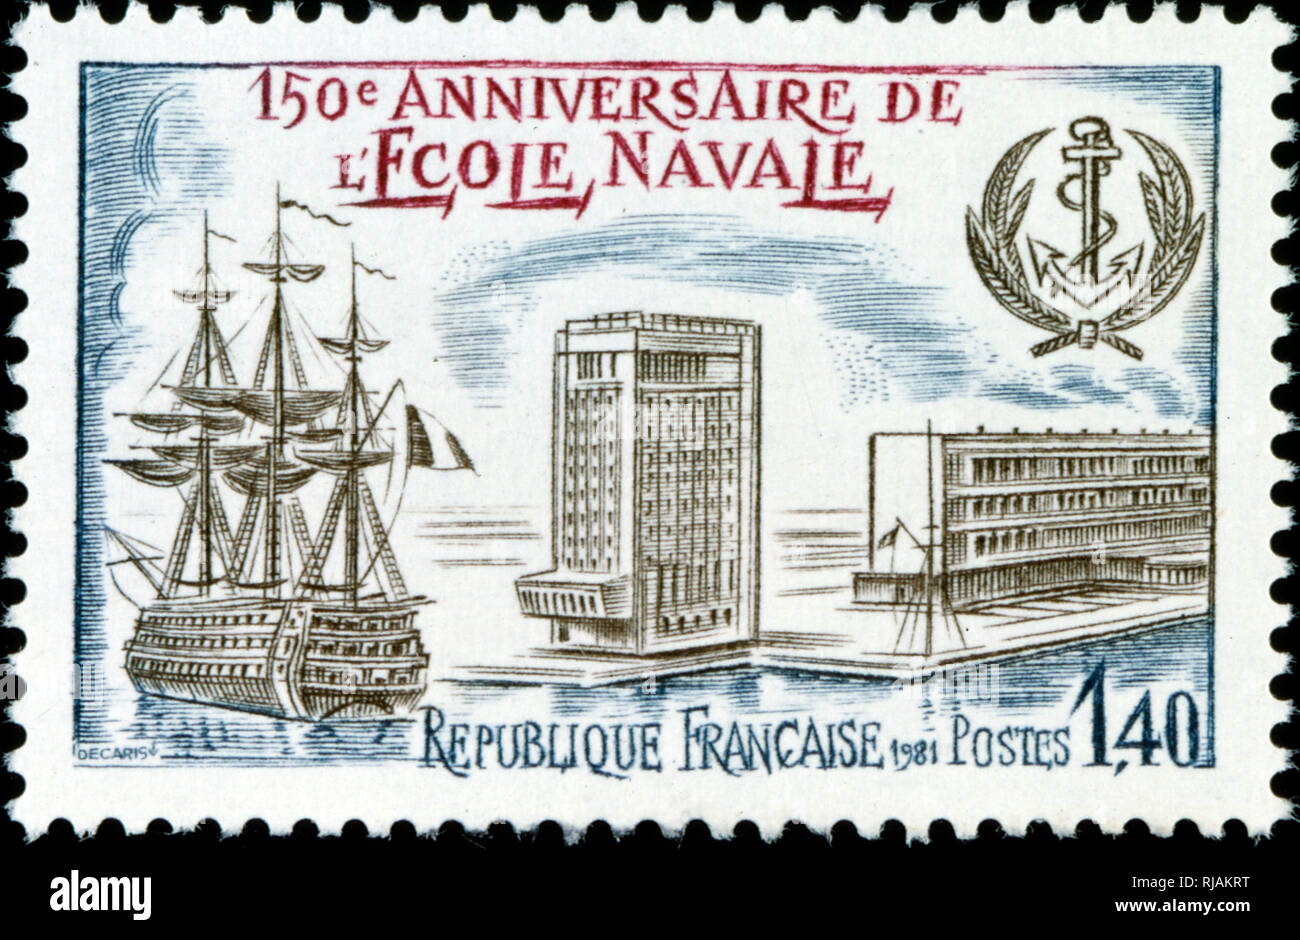 French postage stamp celebrating the 150th anniversary of the Ecole Navalle; French Naval Academy 1980 Stock Photo